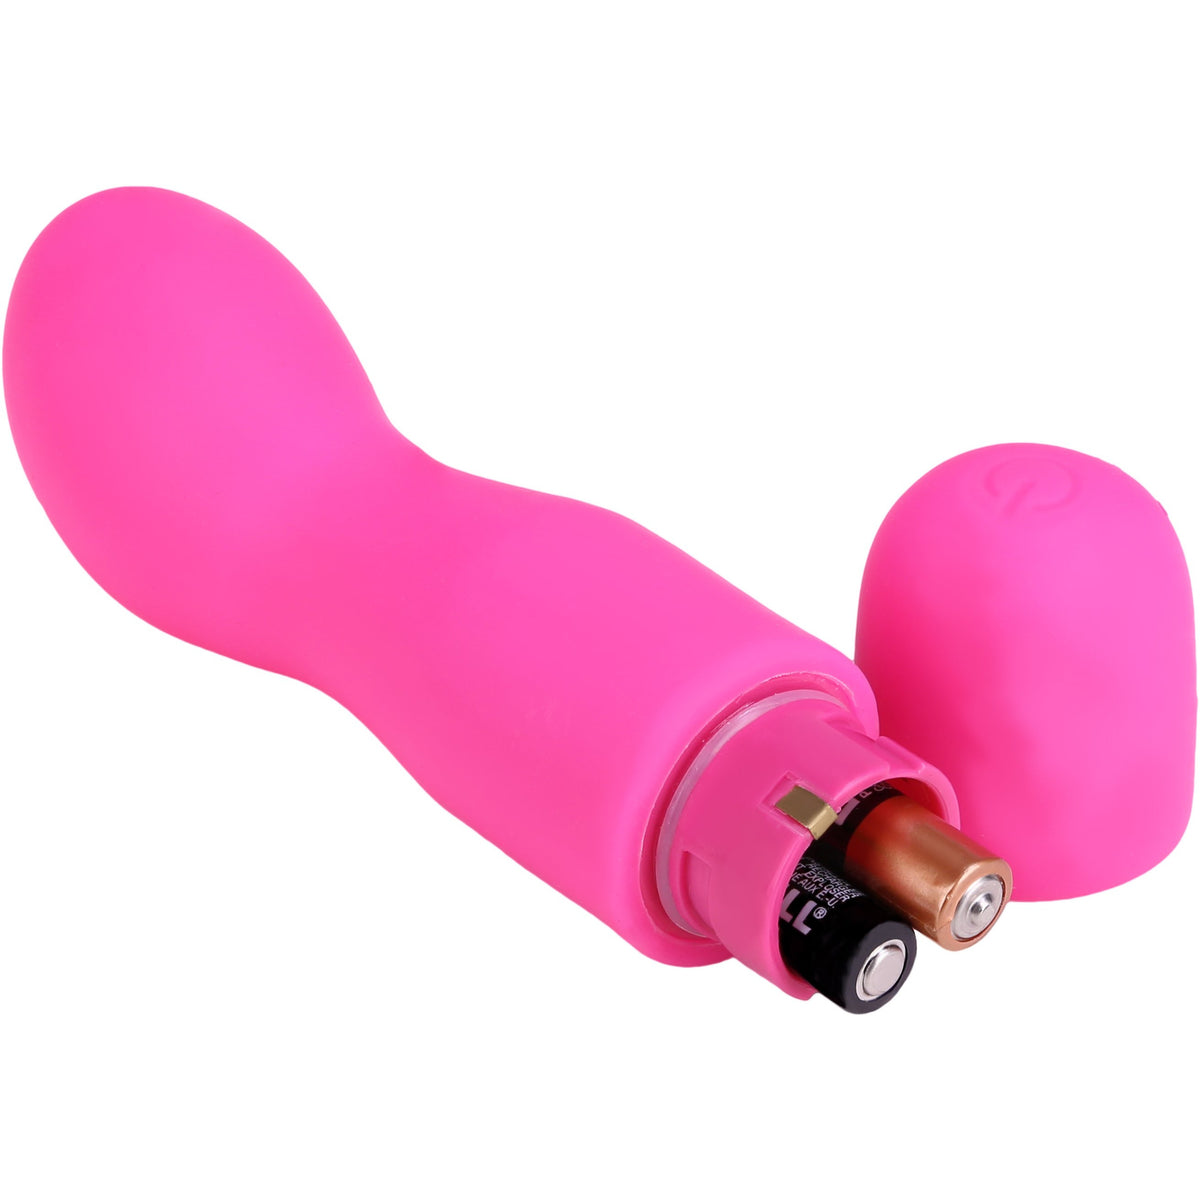 NMC First Night 5 inch Silicone 10 Function G-Spot Vibe - Pink